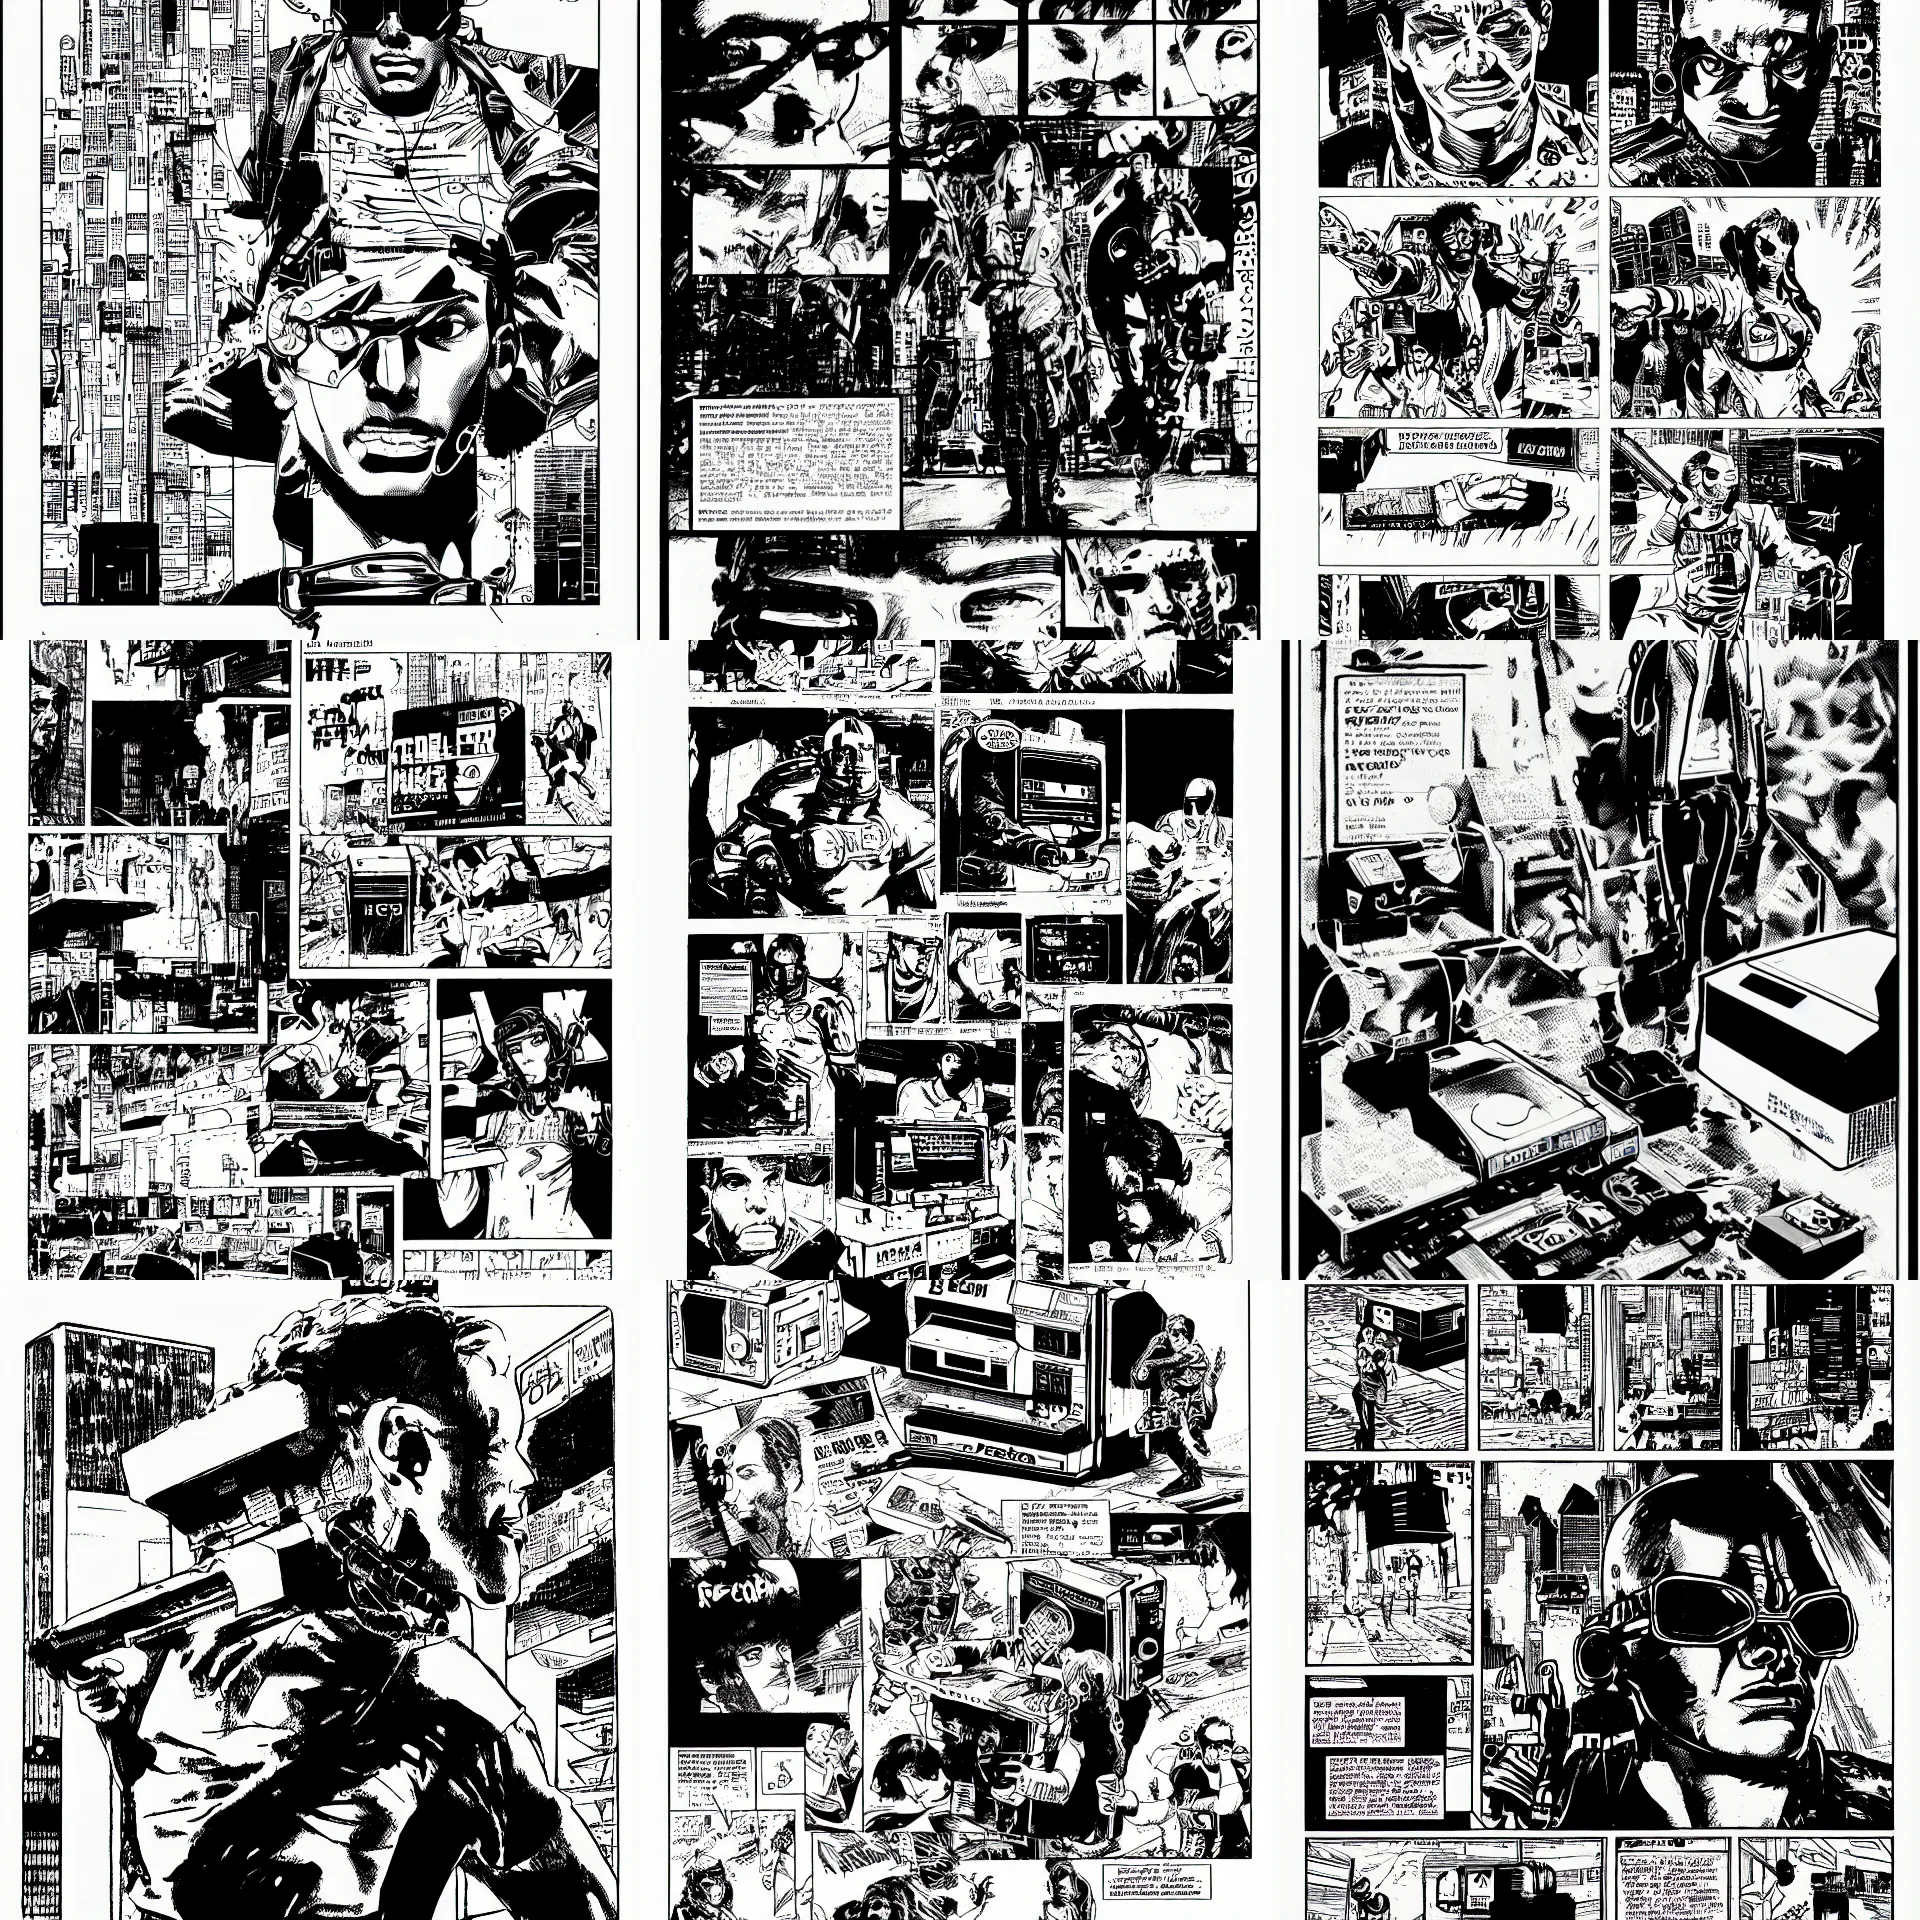 Prompt: ibm pc 5 1 6 0 product shot, a page from cyberpunk 2 0 2 0, style of paolo parente, style of mike jackson, 1 9 9 0 s comic book style, white background, ink drawing, black and white